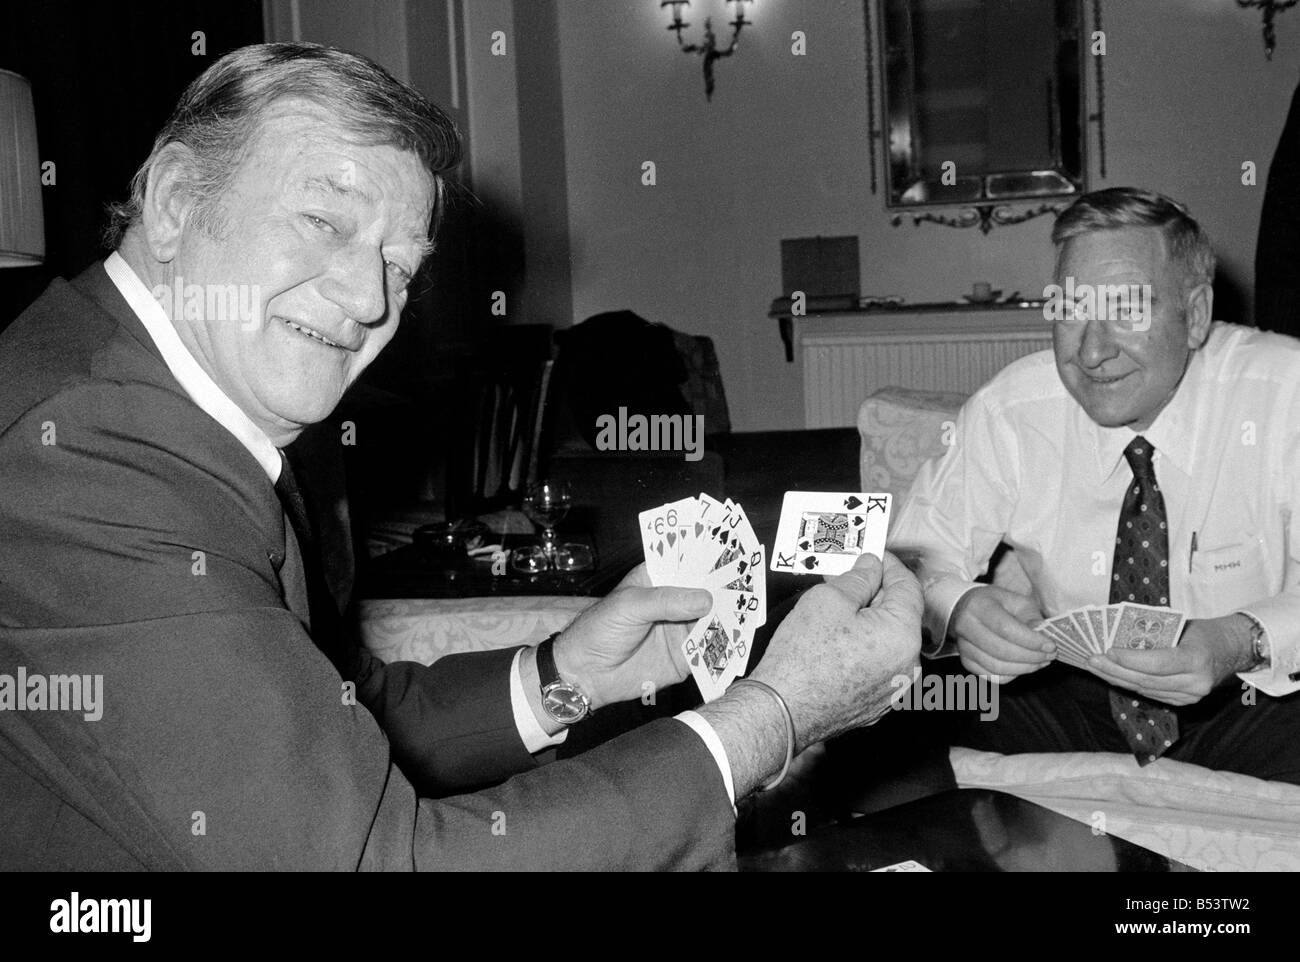 John Wayne pictured relaxing playing cards in his suite at The Connaught Hotel, Mayfair, London. January 1974. Stock Photo